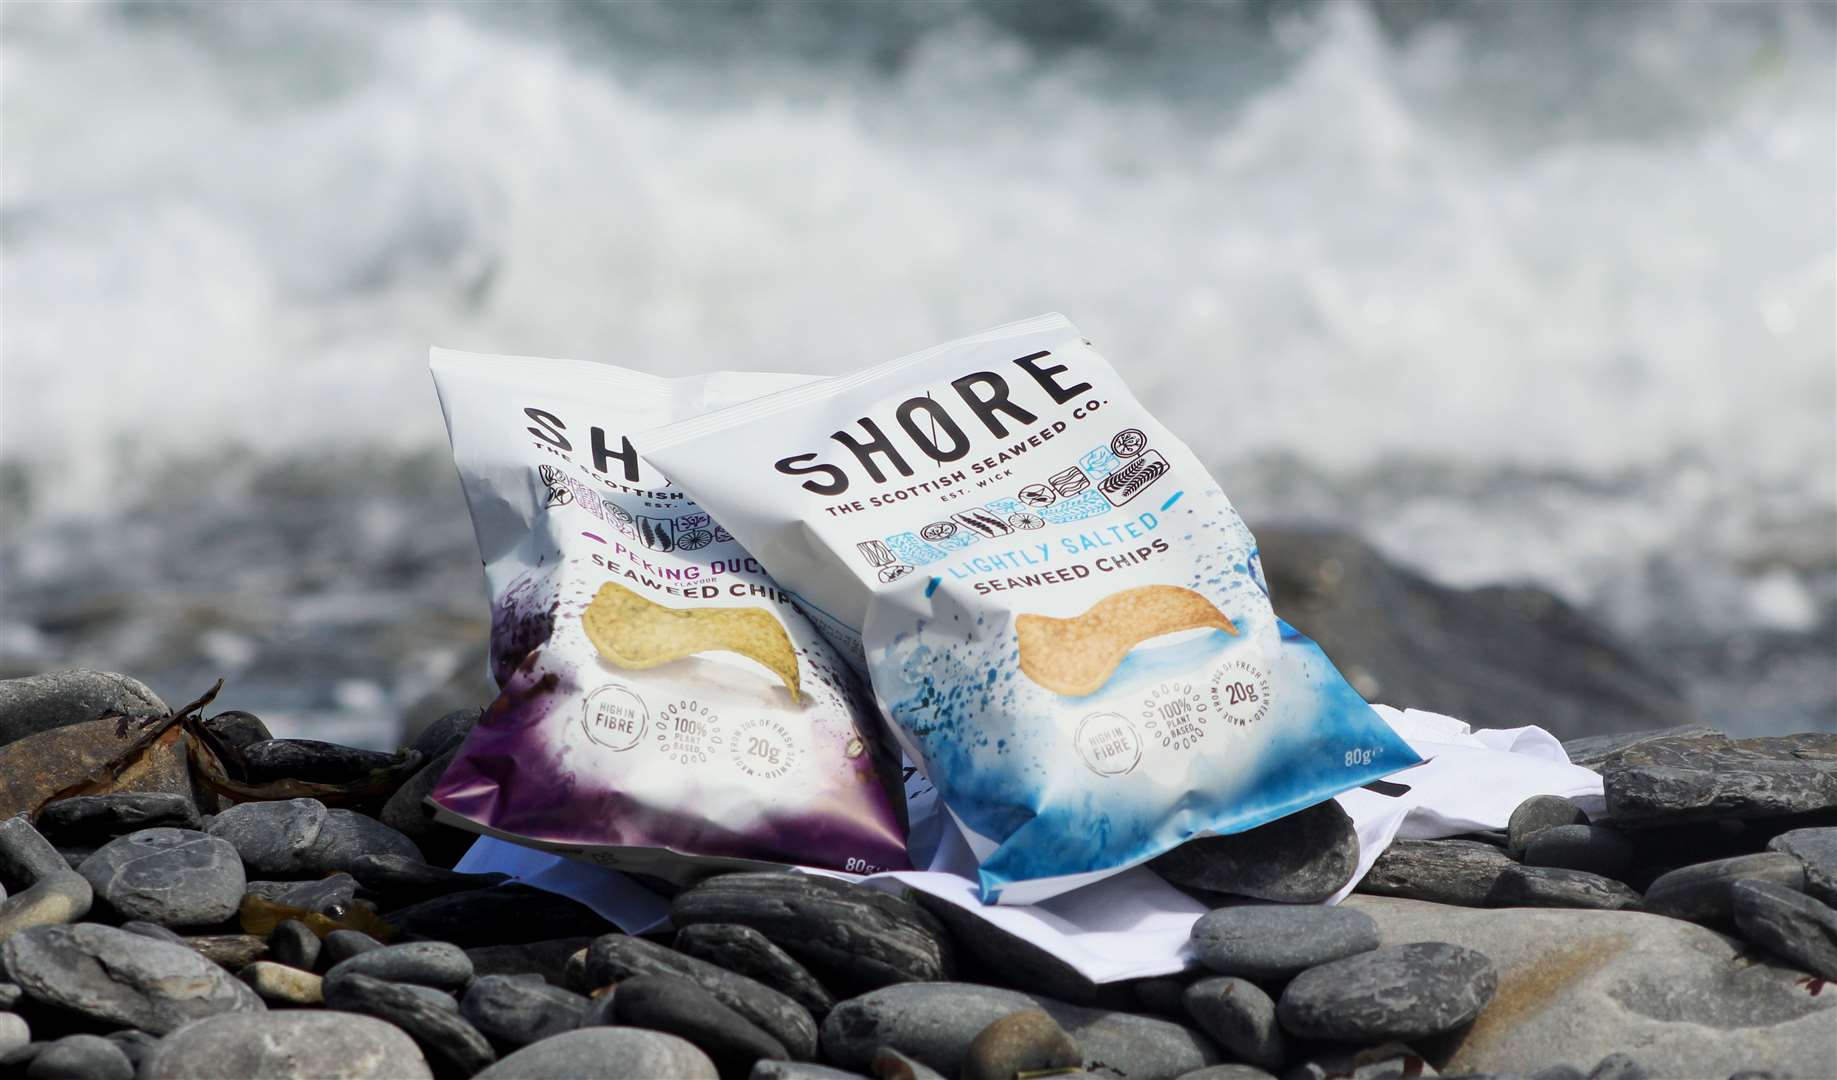 Shore was praised for its seaweed chips by the judges in the Highlands and Islands Food and Drink Awards. Picture: Alan Hendry